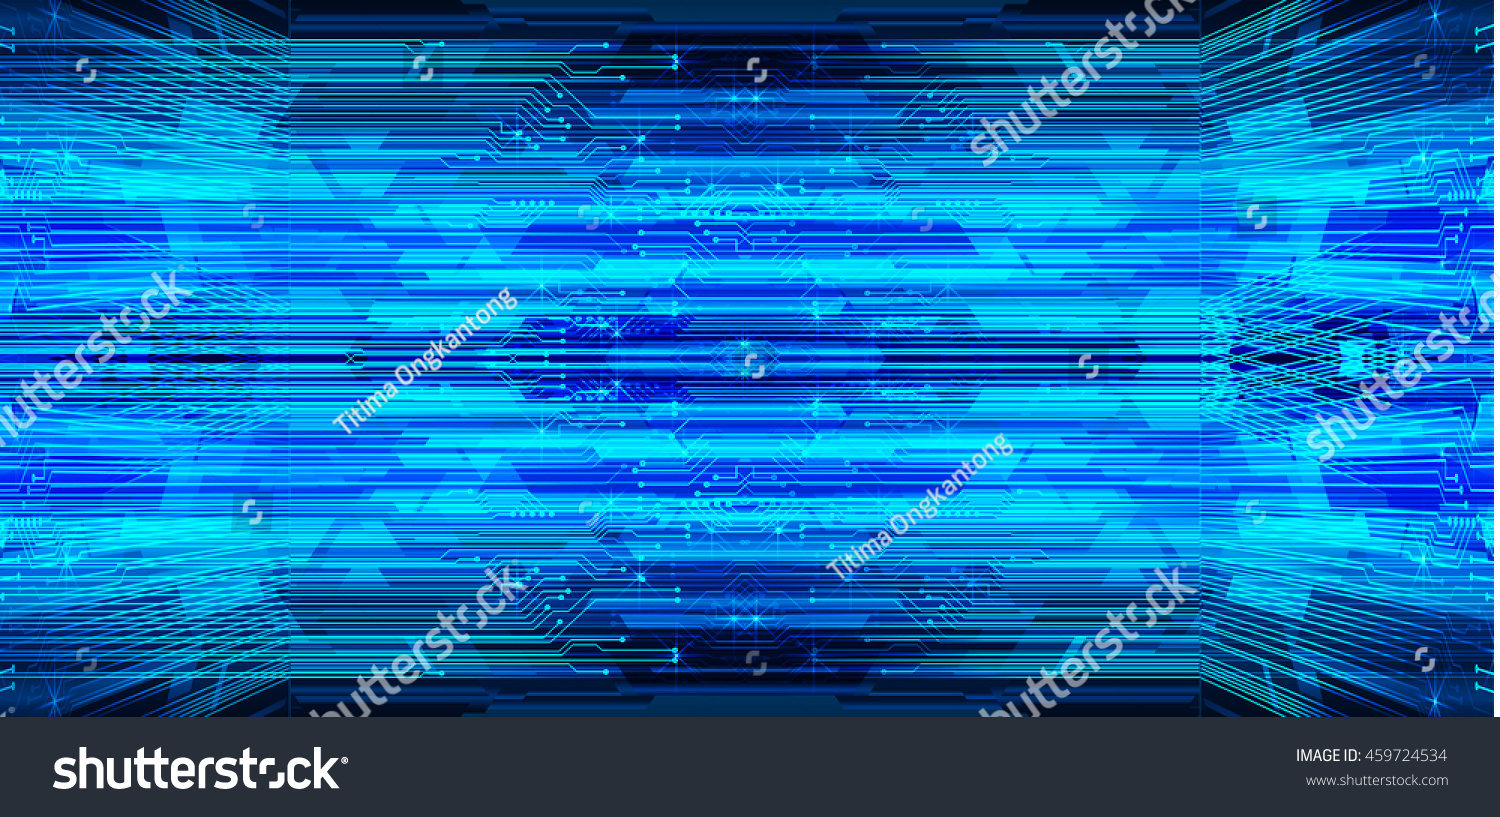 blue abstract cyber future technology concept background, illustration, circuit, binary code. move motion speed #459724534